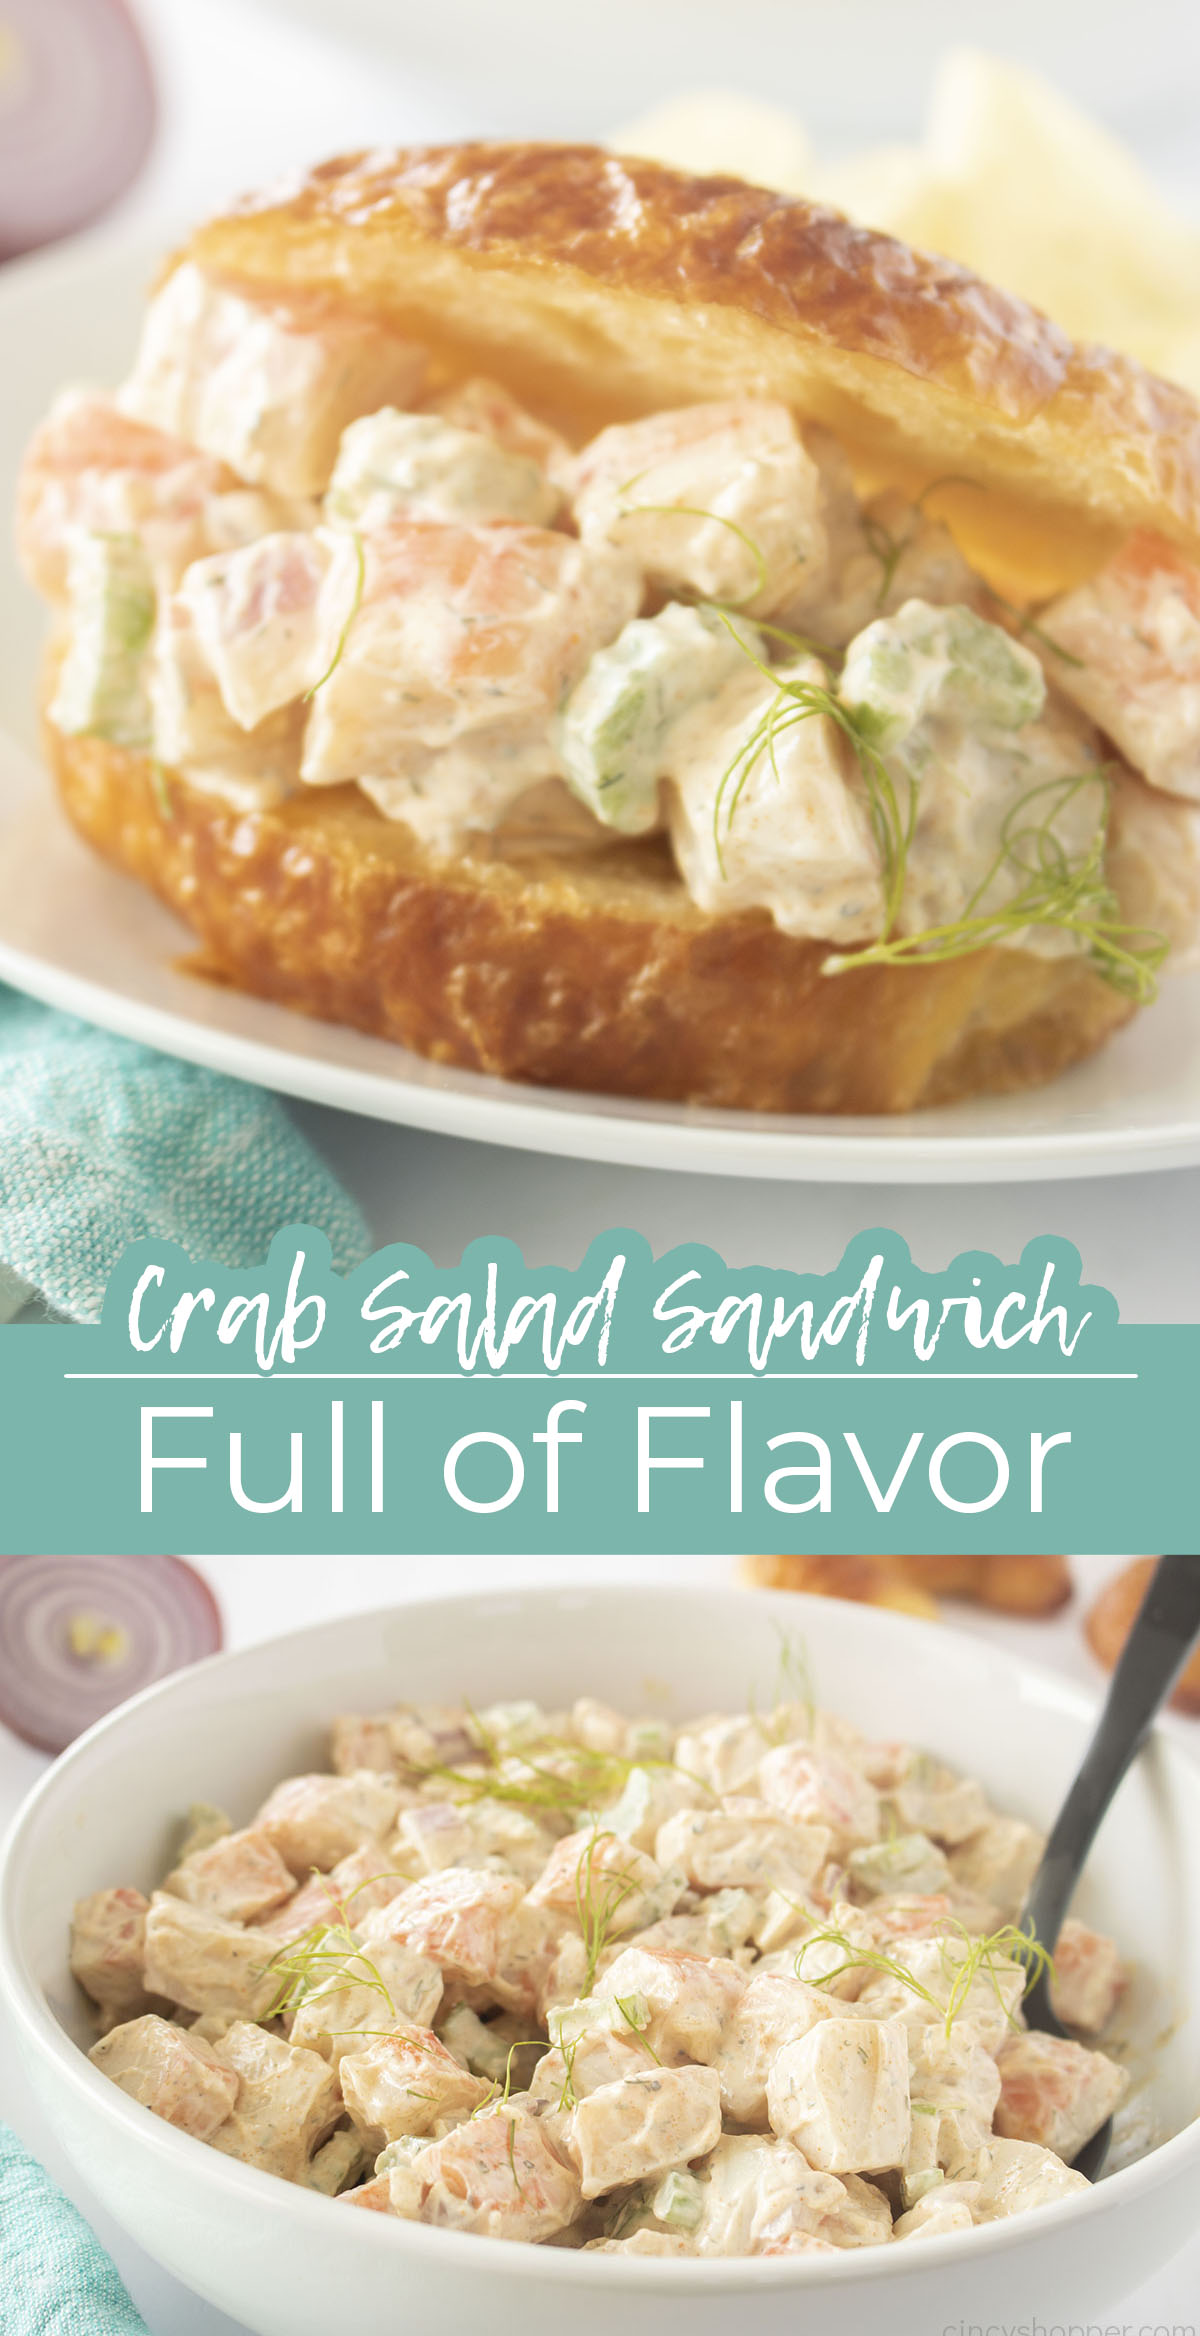 Long in text on image Crab Salad Sandwich Full of Flavor.